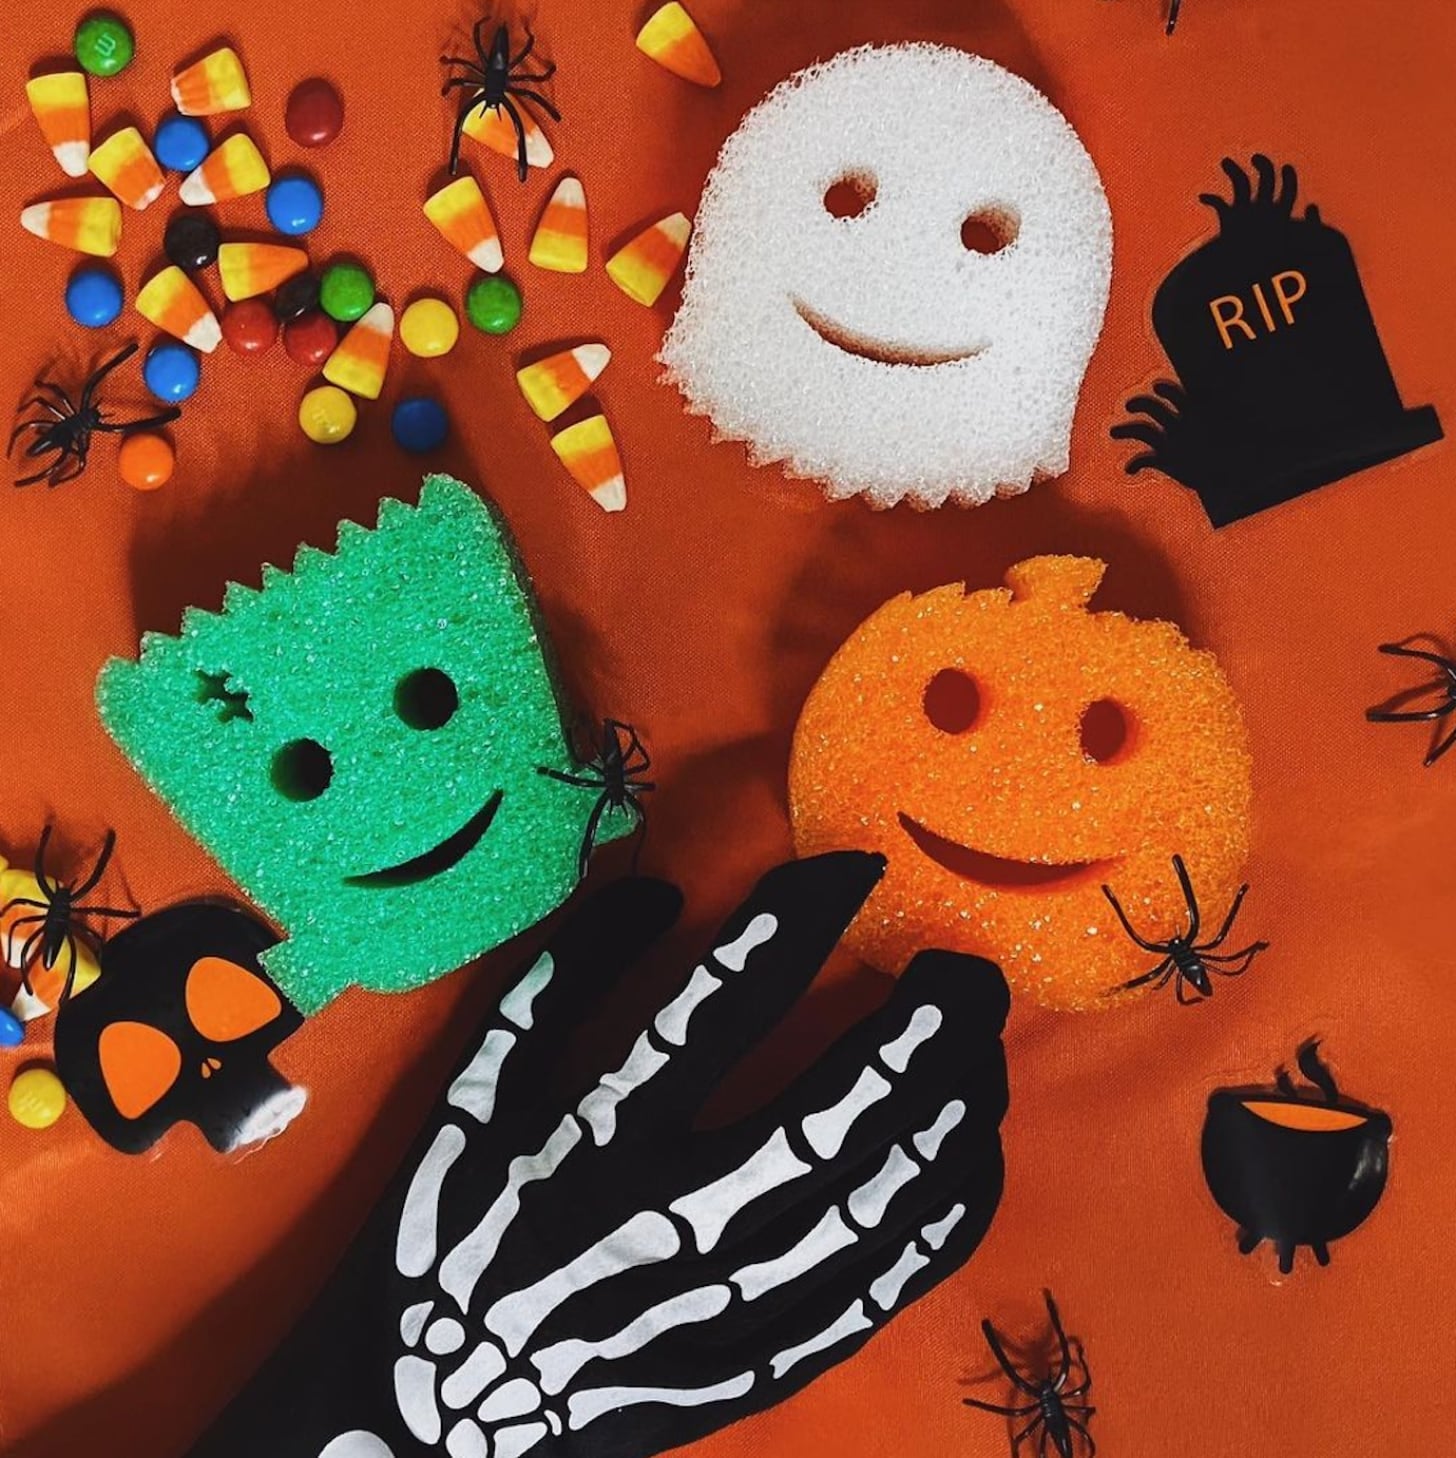 Scrub Daddy's Halloween Sponges Will Lead to Spooky Cleaning All